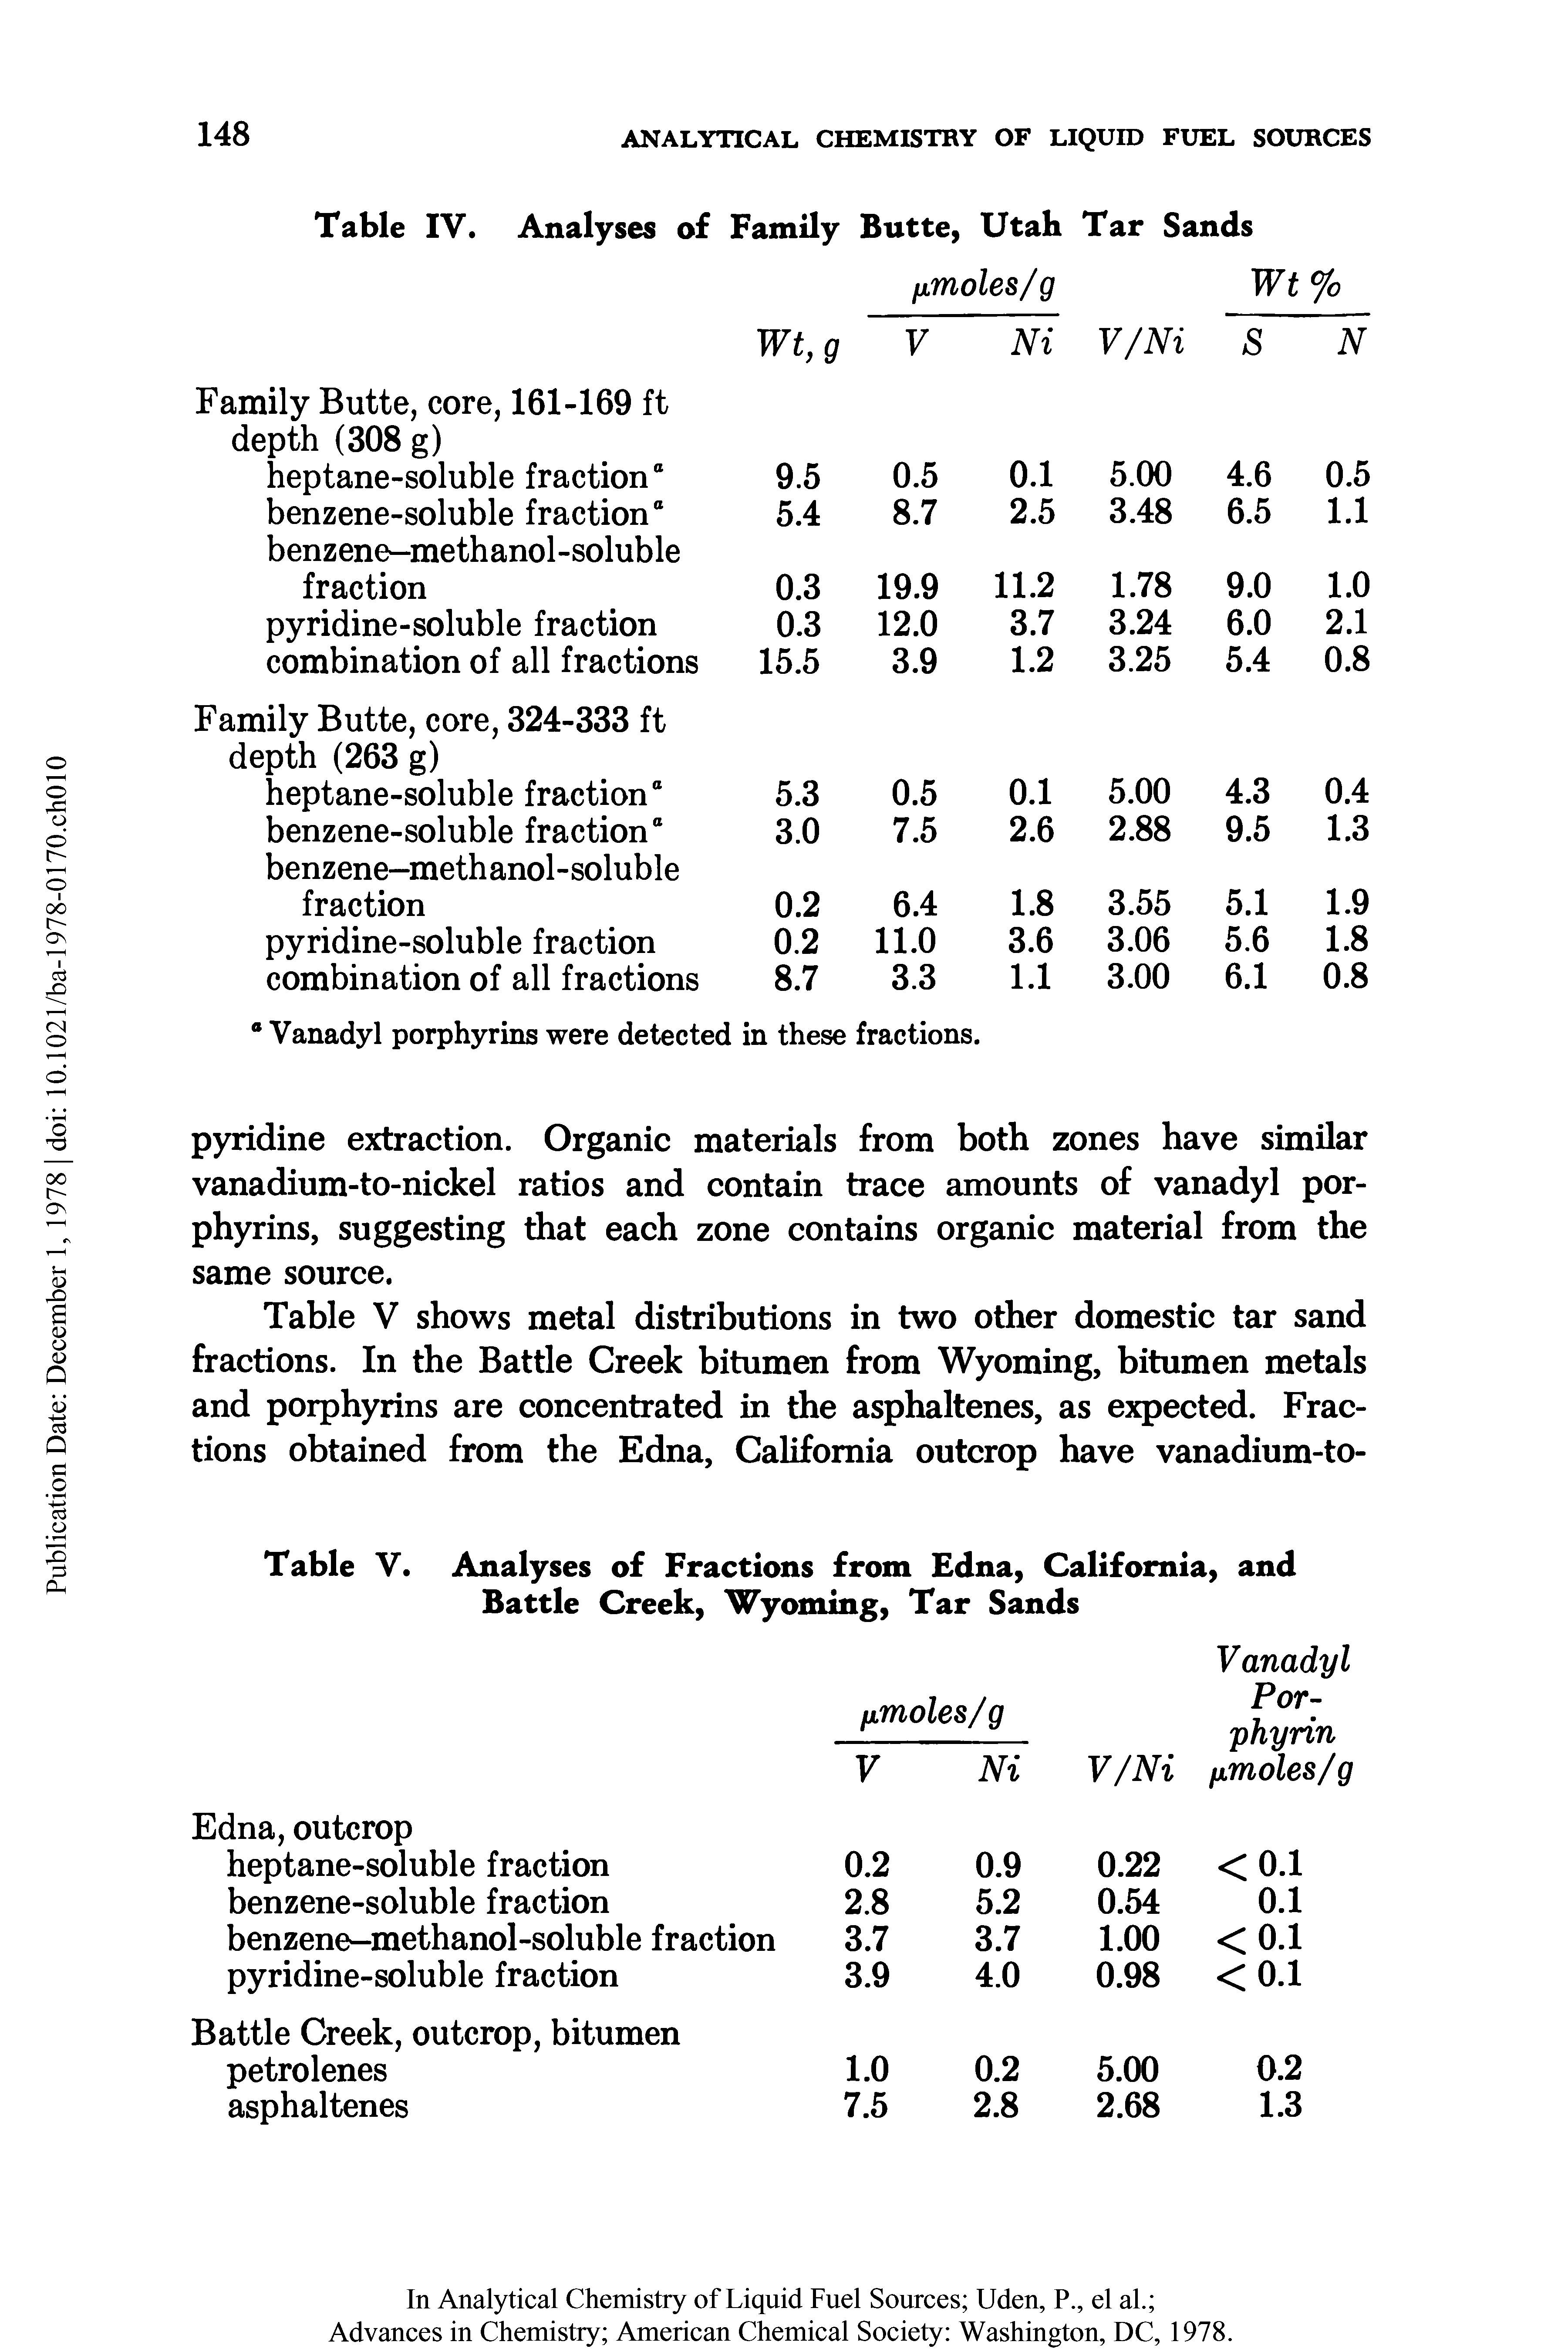 Table V shows metal distributions in two other domestic tar sand fractions. In the Battle Creek bitumen from Wyoming, bitumen metals and porphyrins are concentrated in the asphaltenes, as expected. Fractions obtained from the Edna, California outcrop have vanadium-to-...